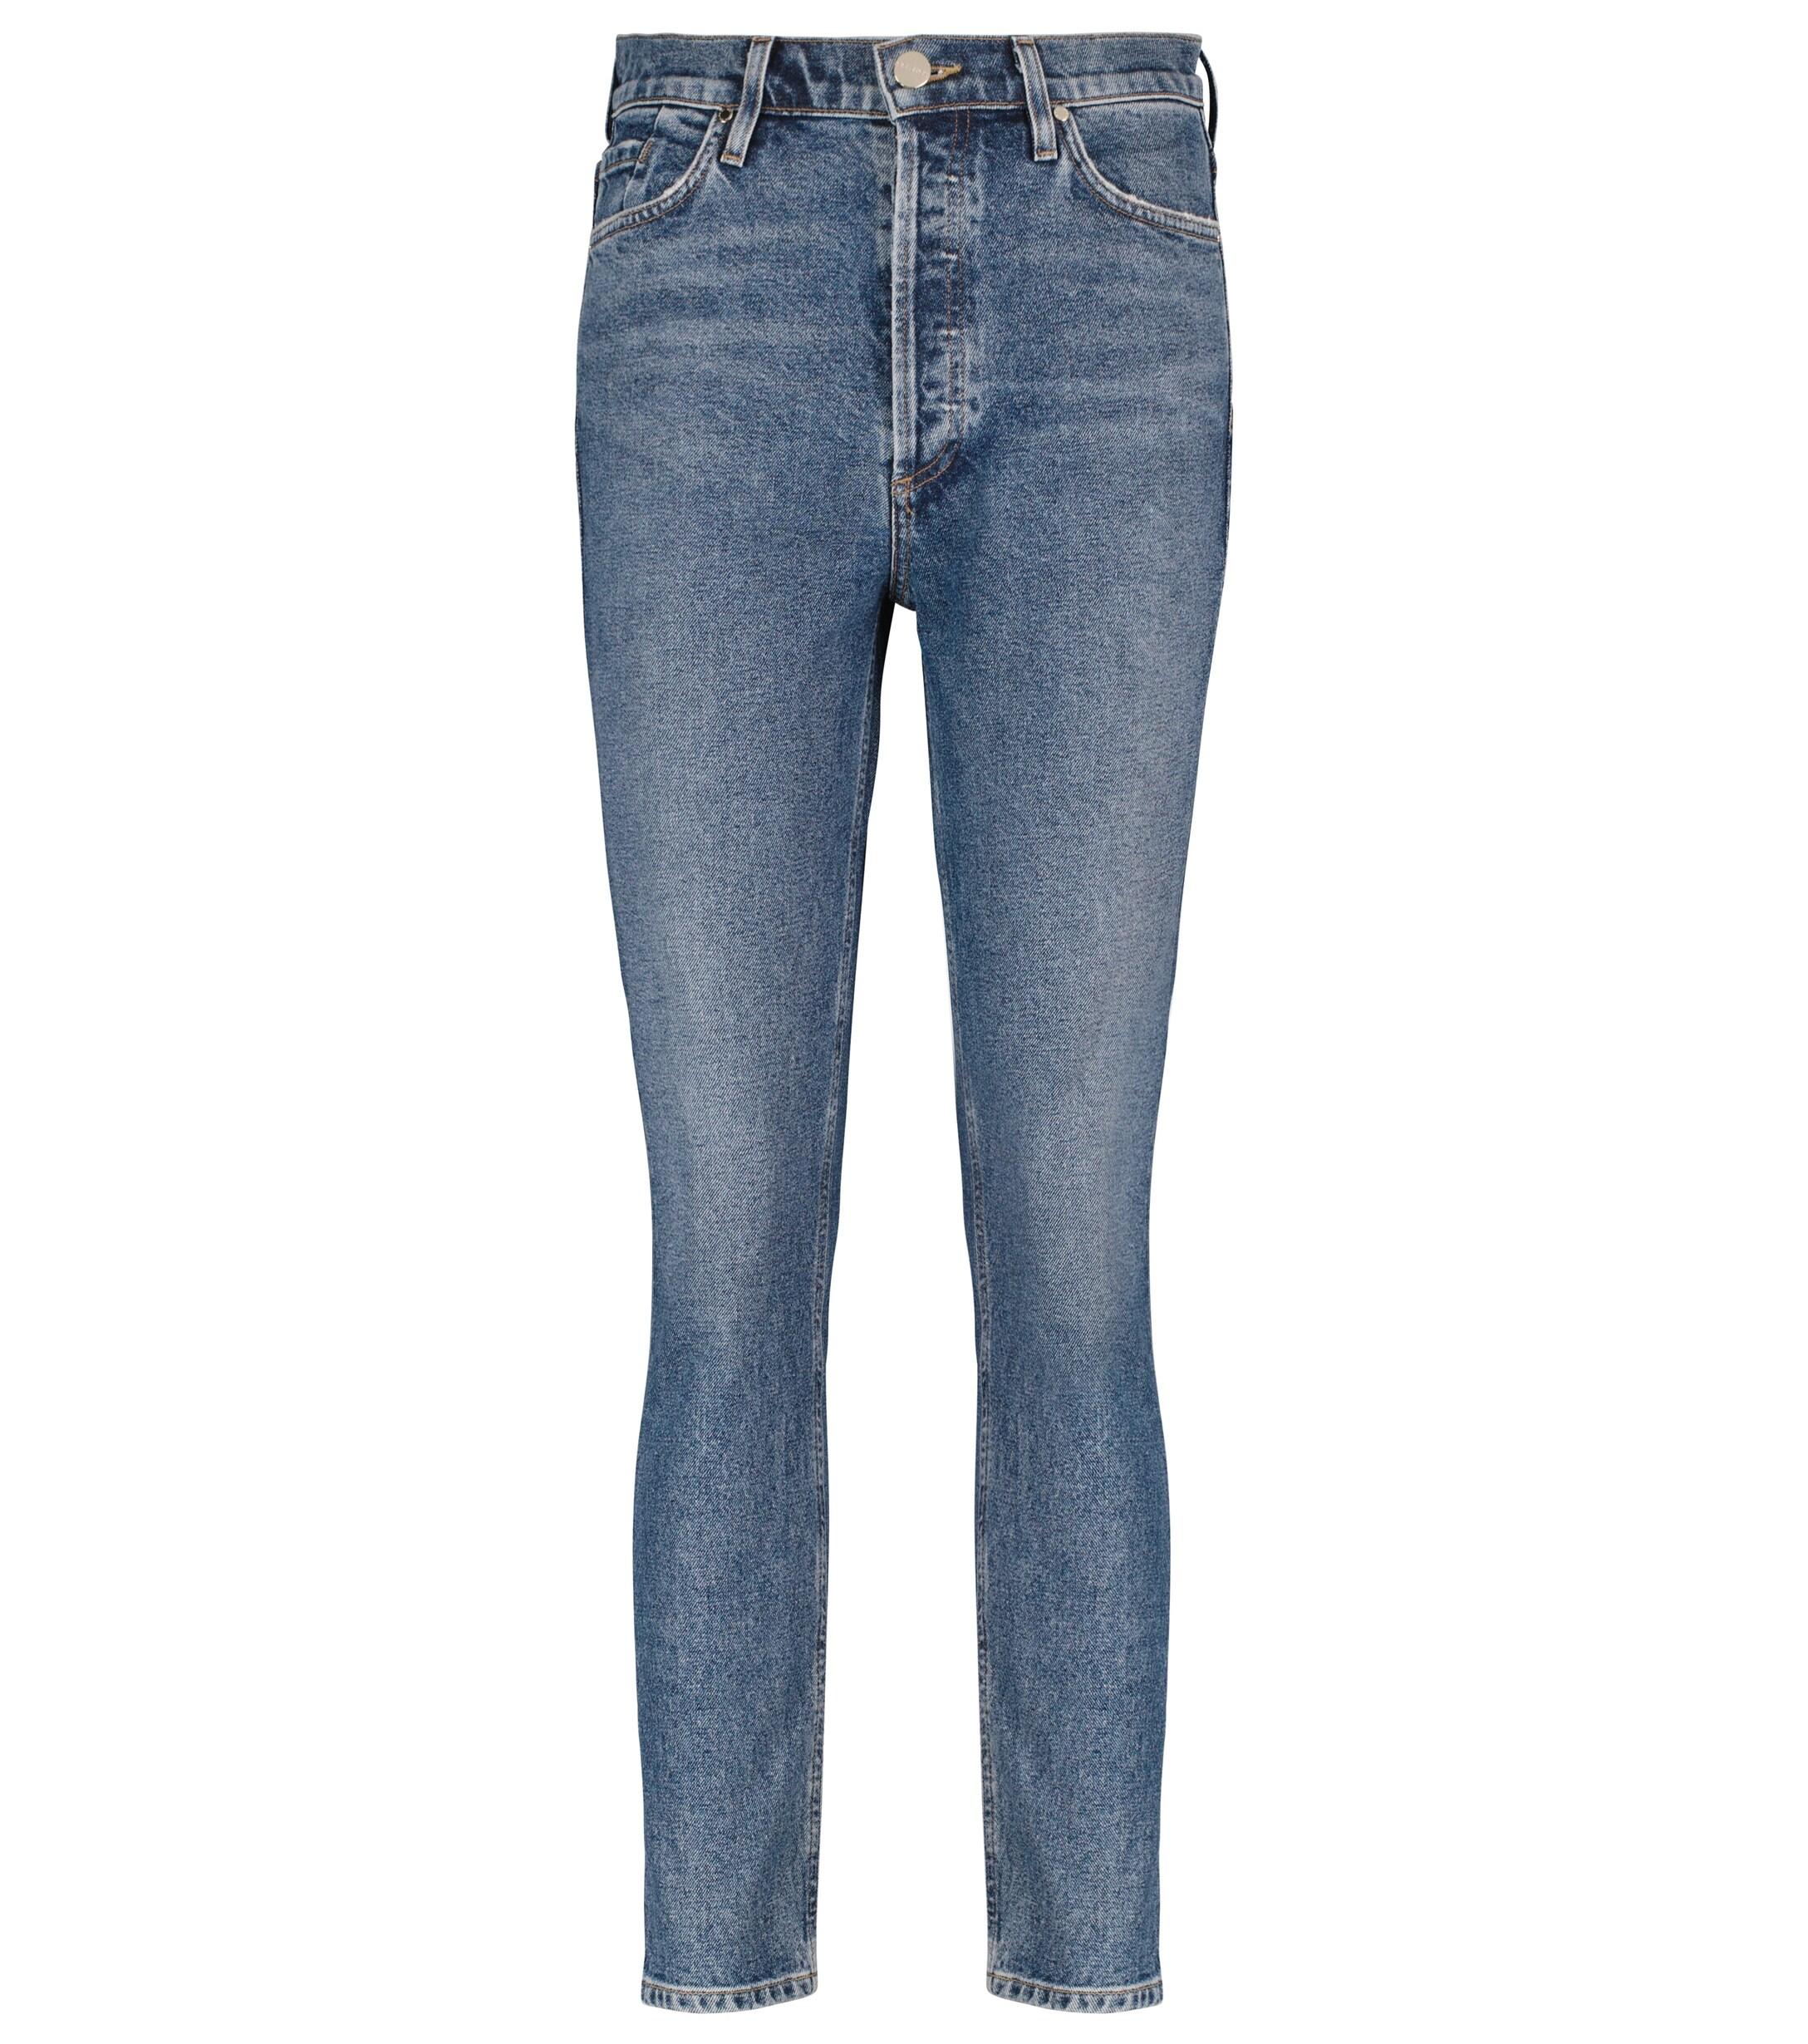 Goldsign Denim The High-rise Slim Jeans in Blue - Lyst